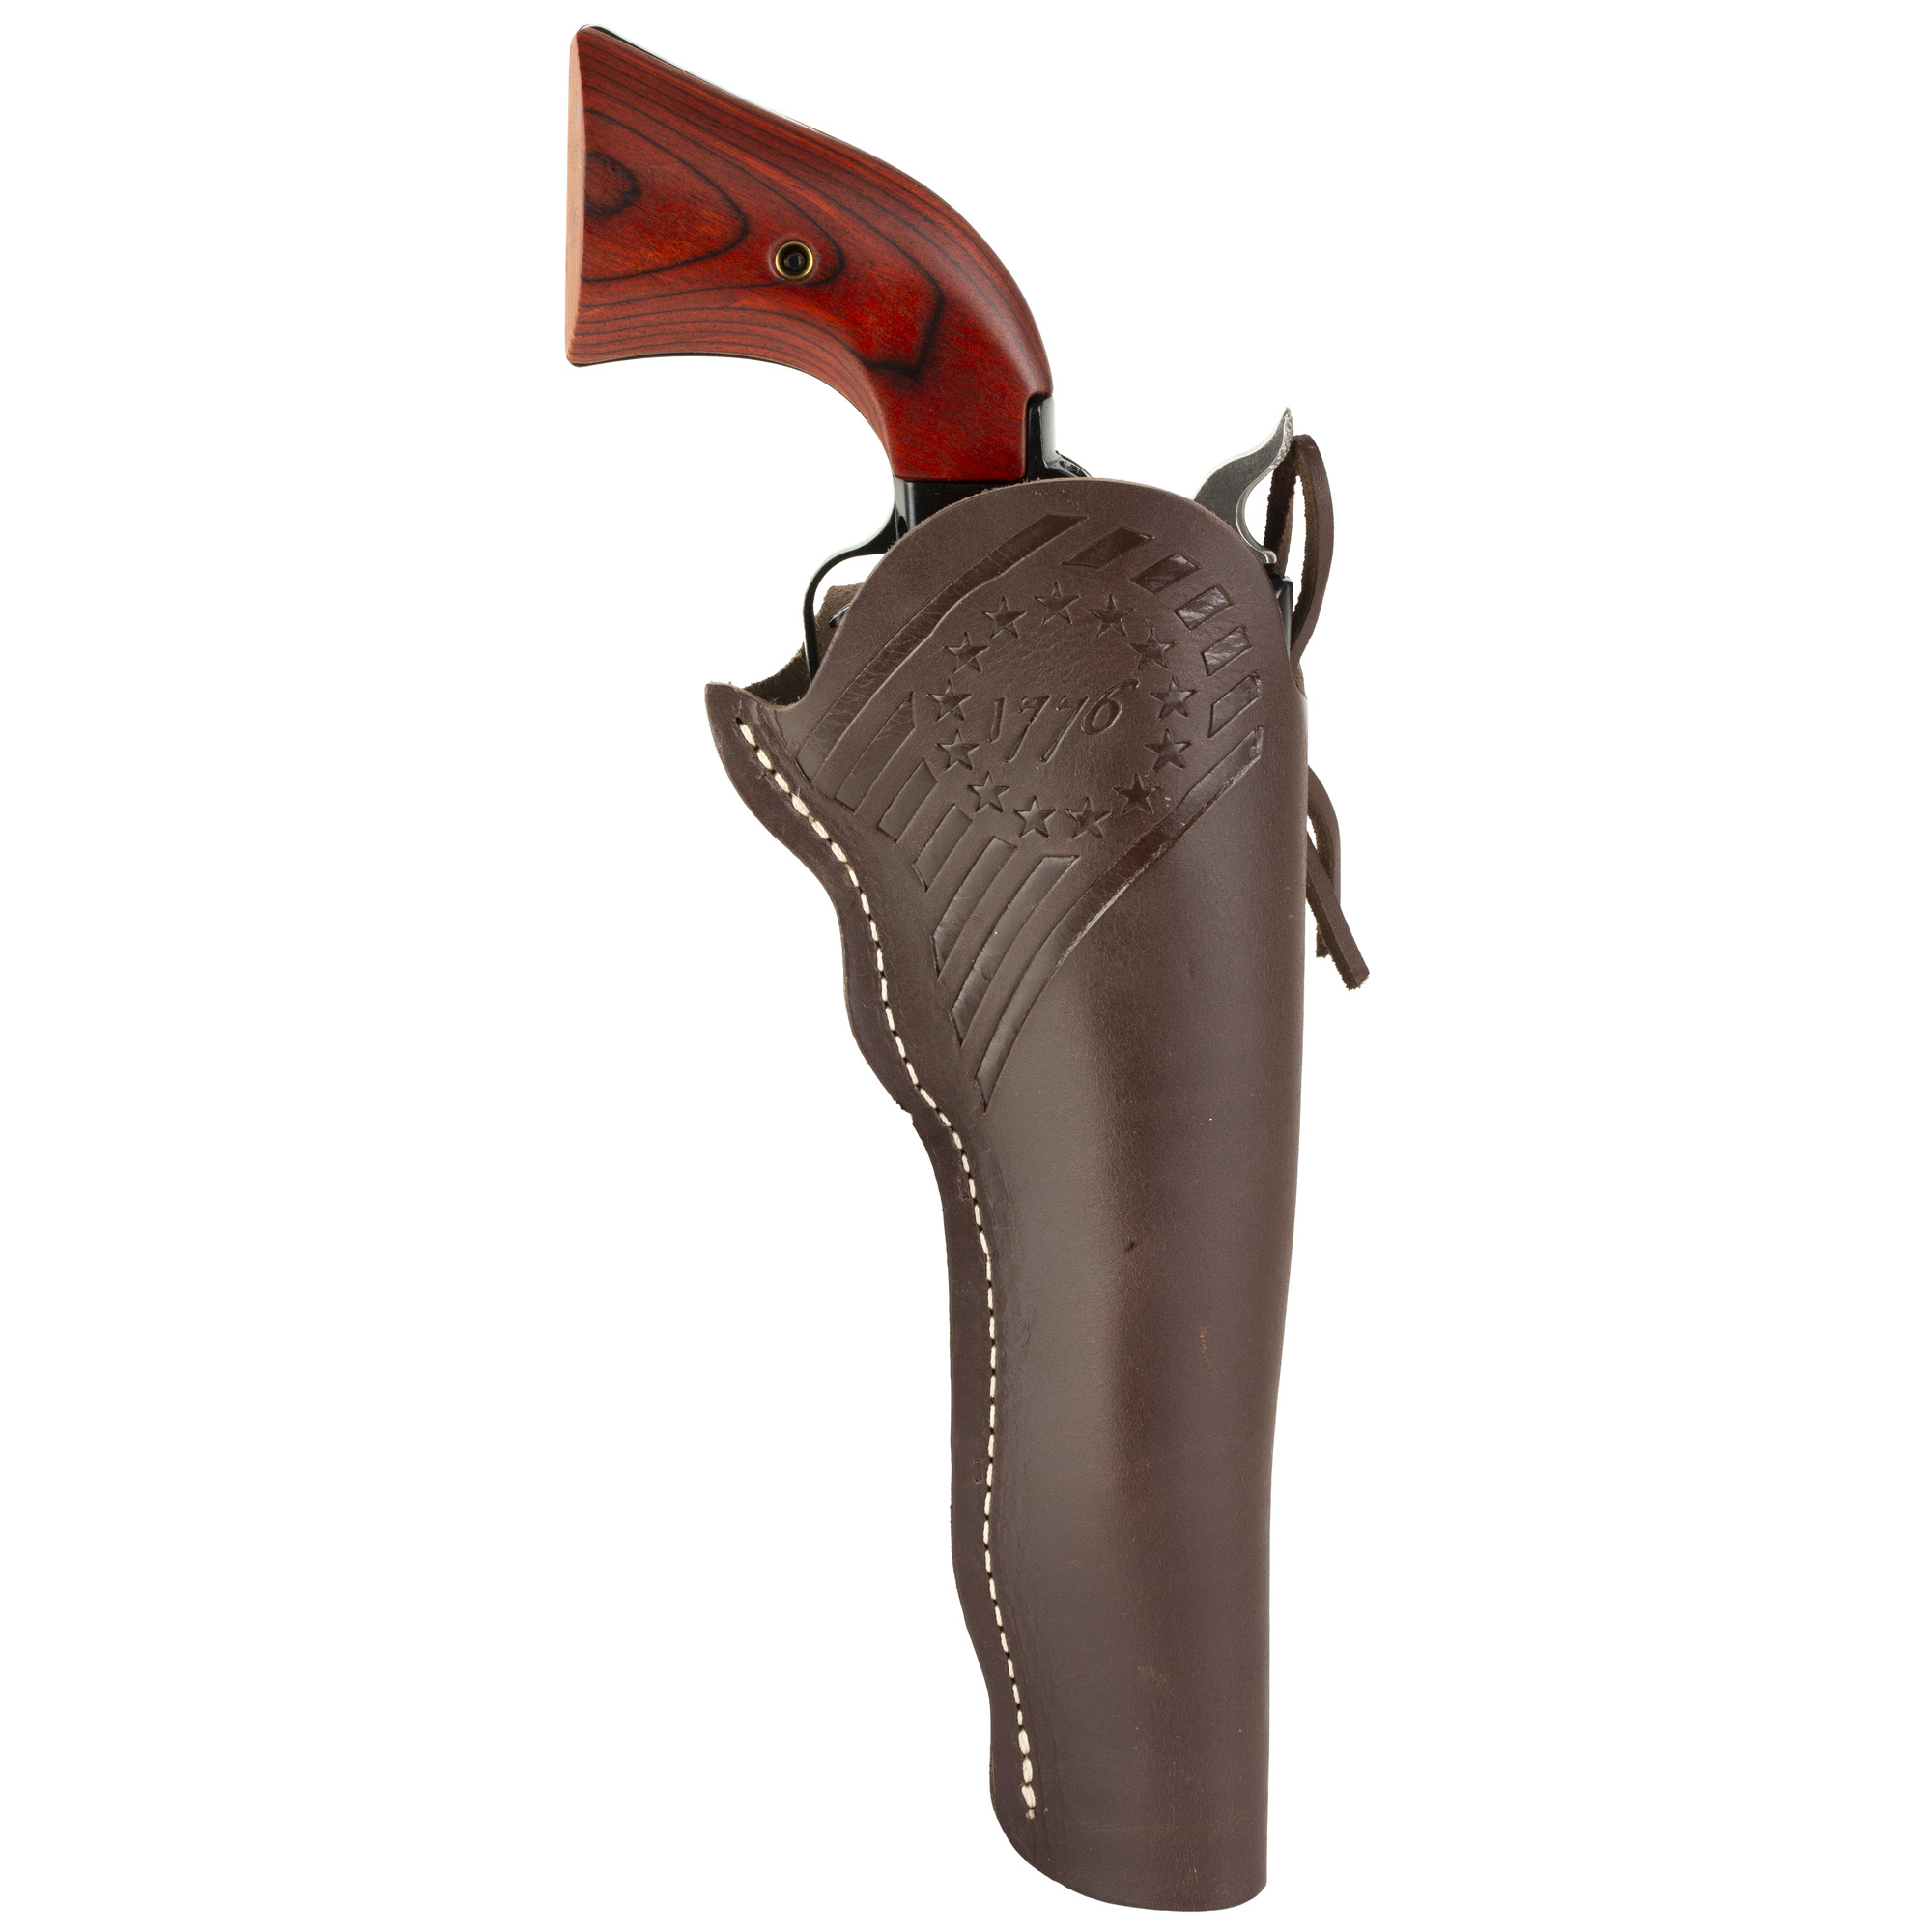 HERITAGE 22LR 6.5 6RD COCO HOLSTER